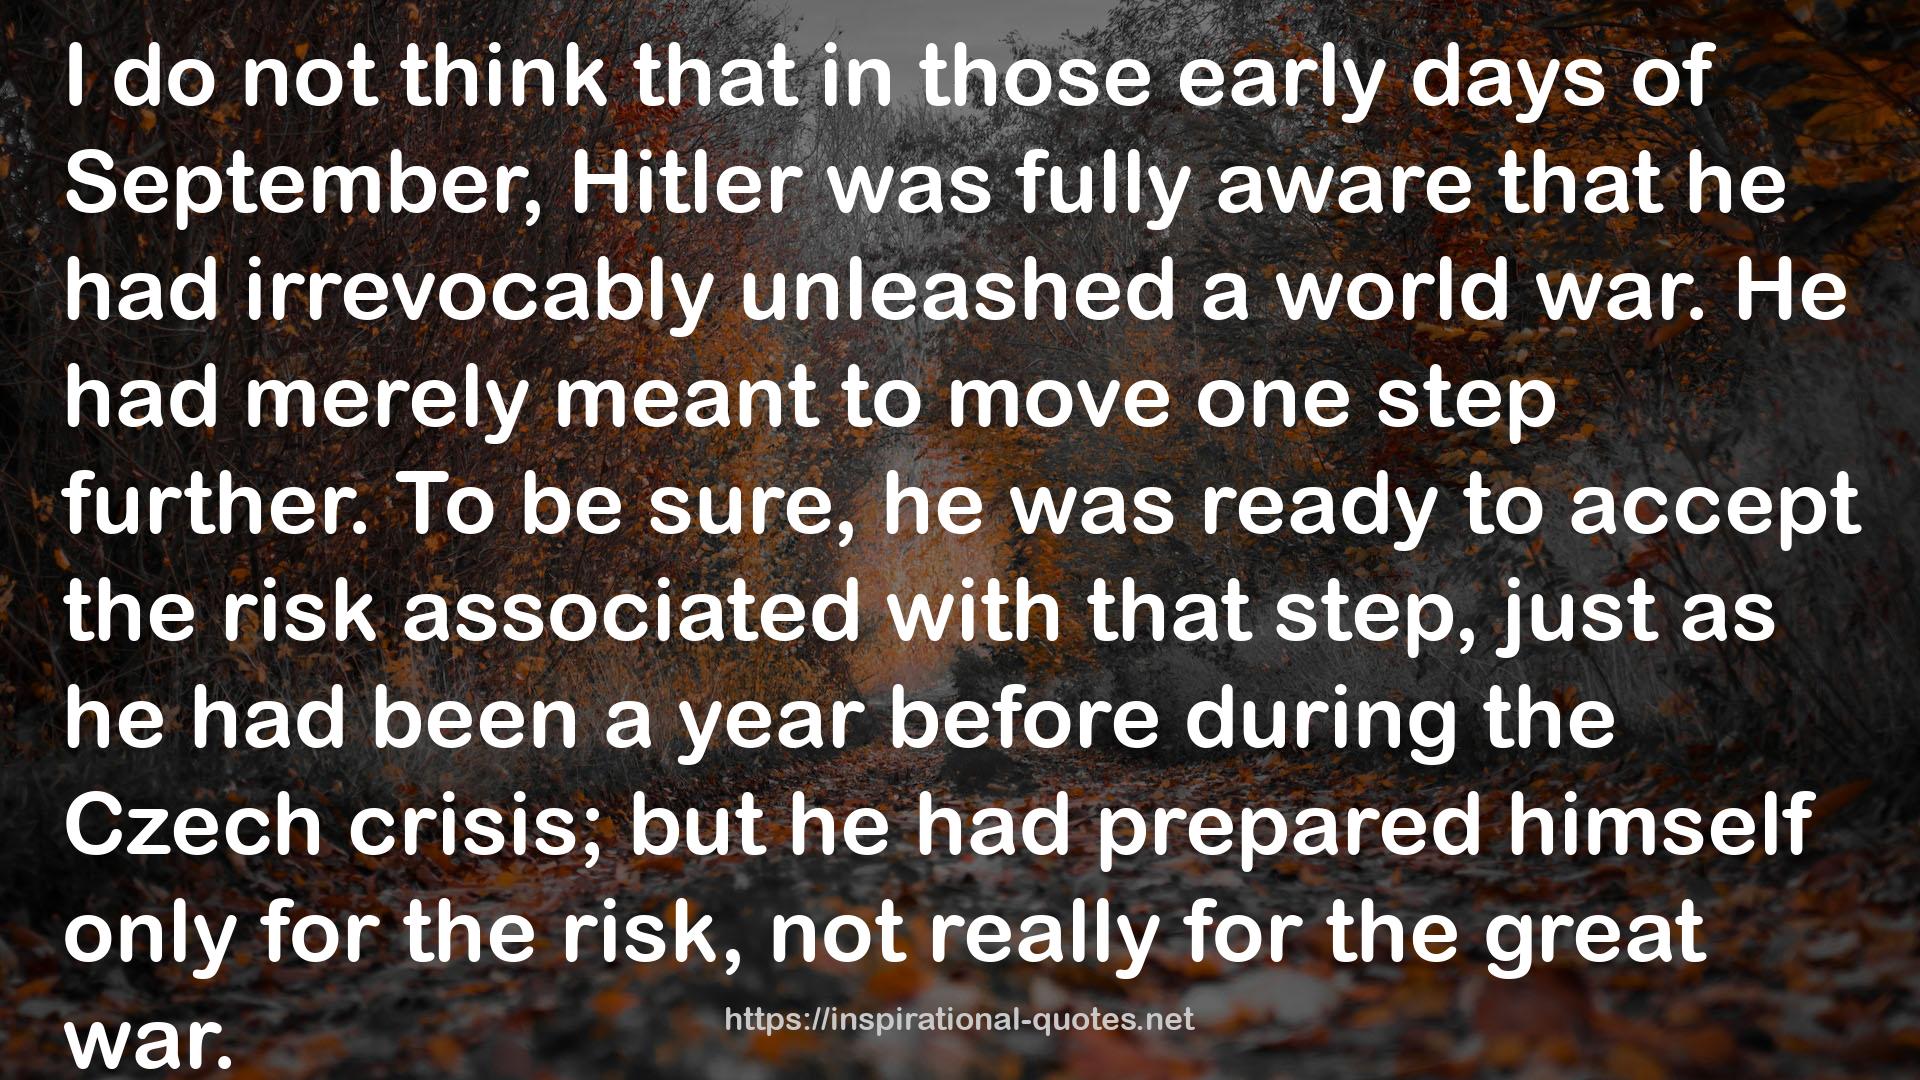 Inside the Third Reich QUOTES